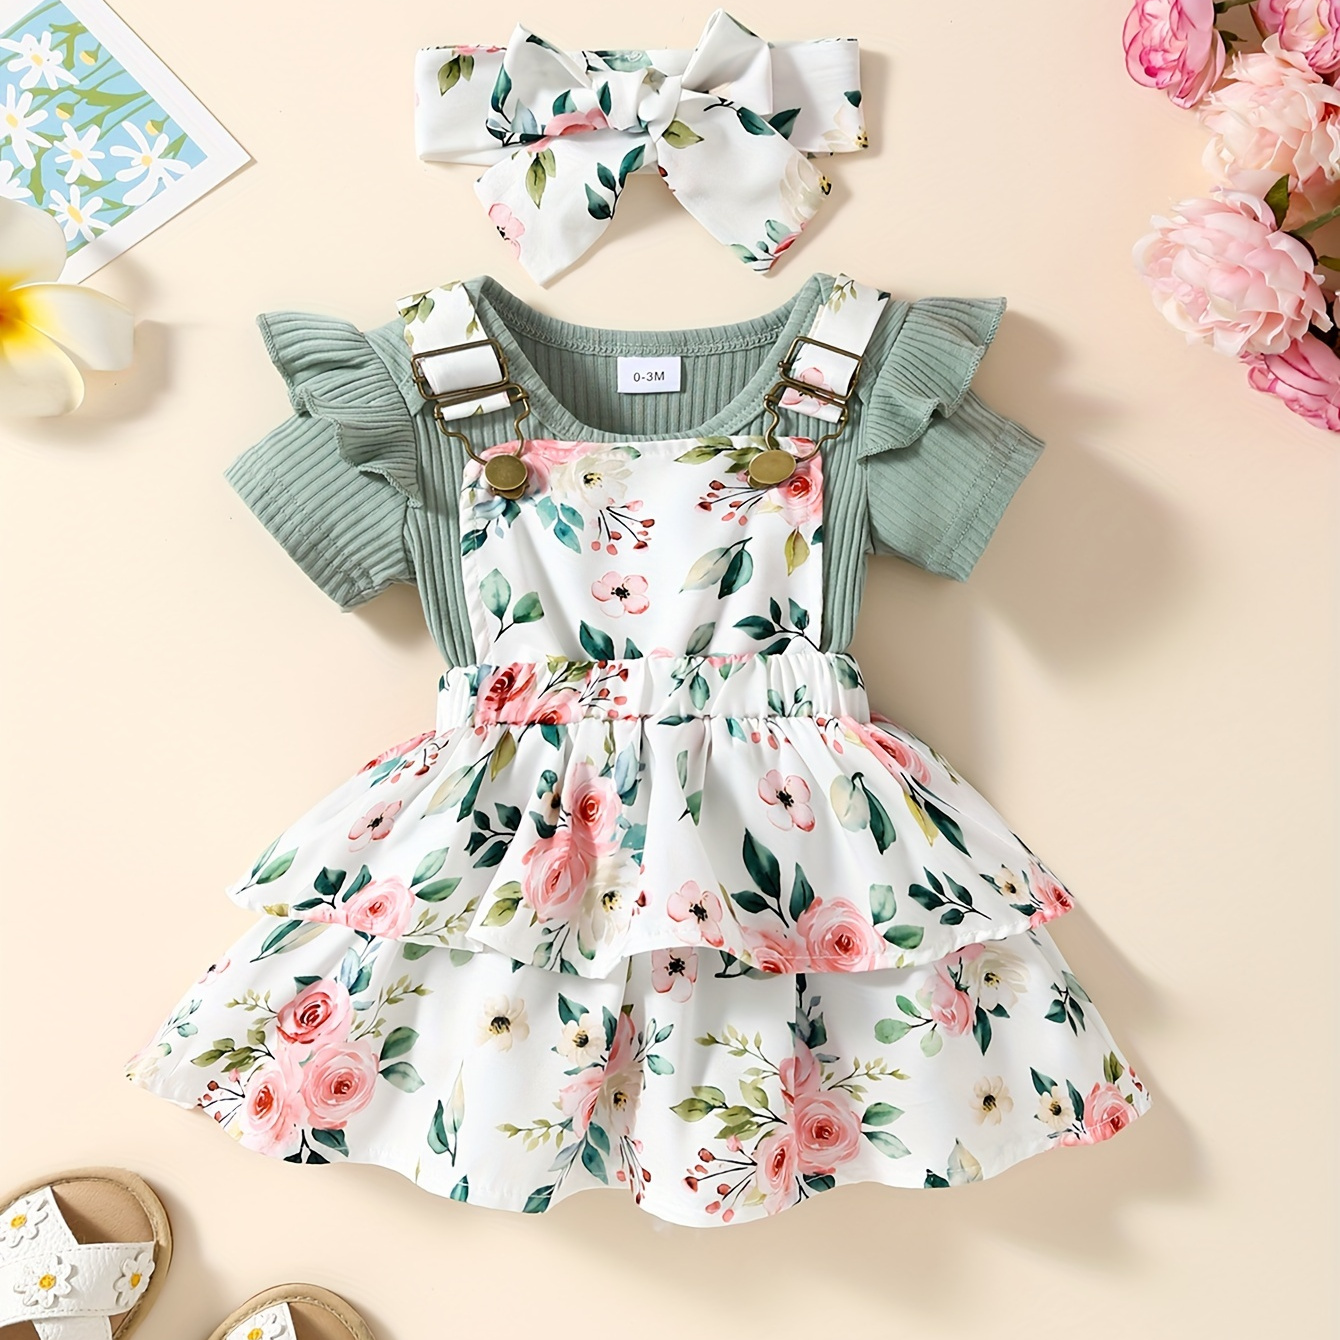 

Baby's Lovely Flower Pattern 2pcs Summer Outfit, Ribbed Bodysuit & Hairband & Suspender Overall Layered Dress Set, Toddler & Infant Girl's Clothes For Daily/holiday/party